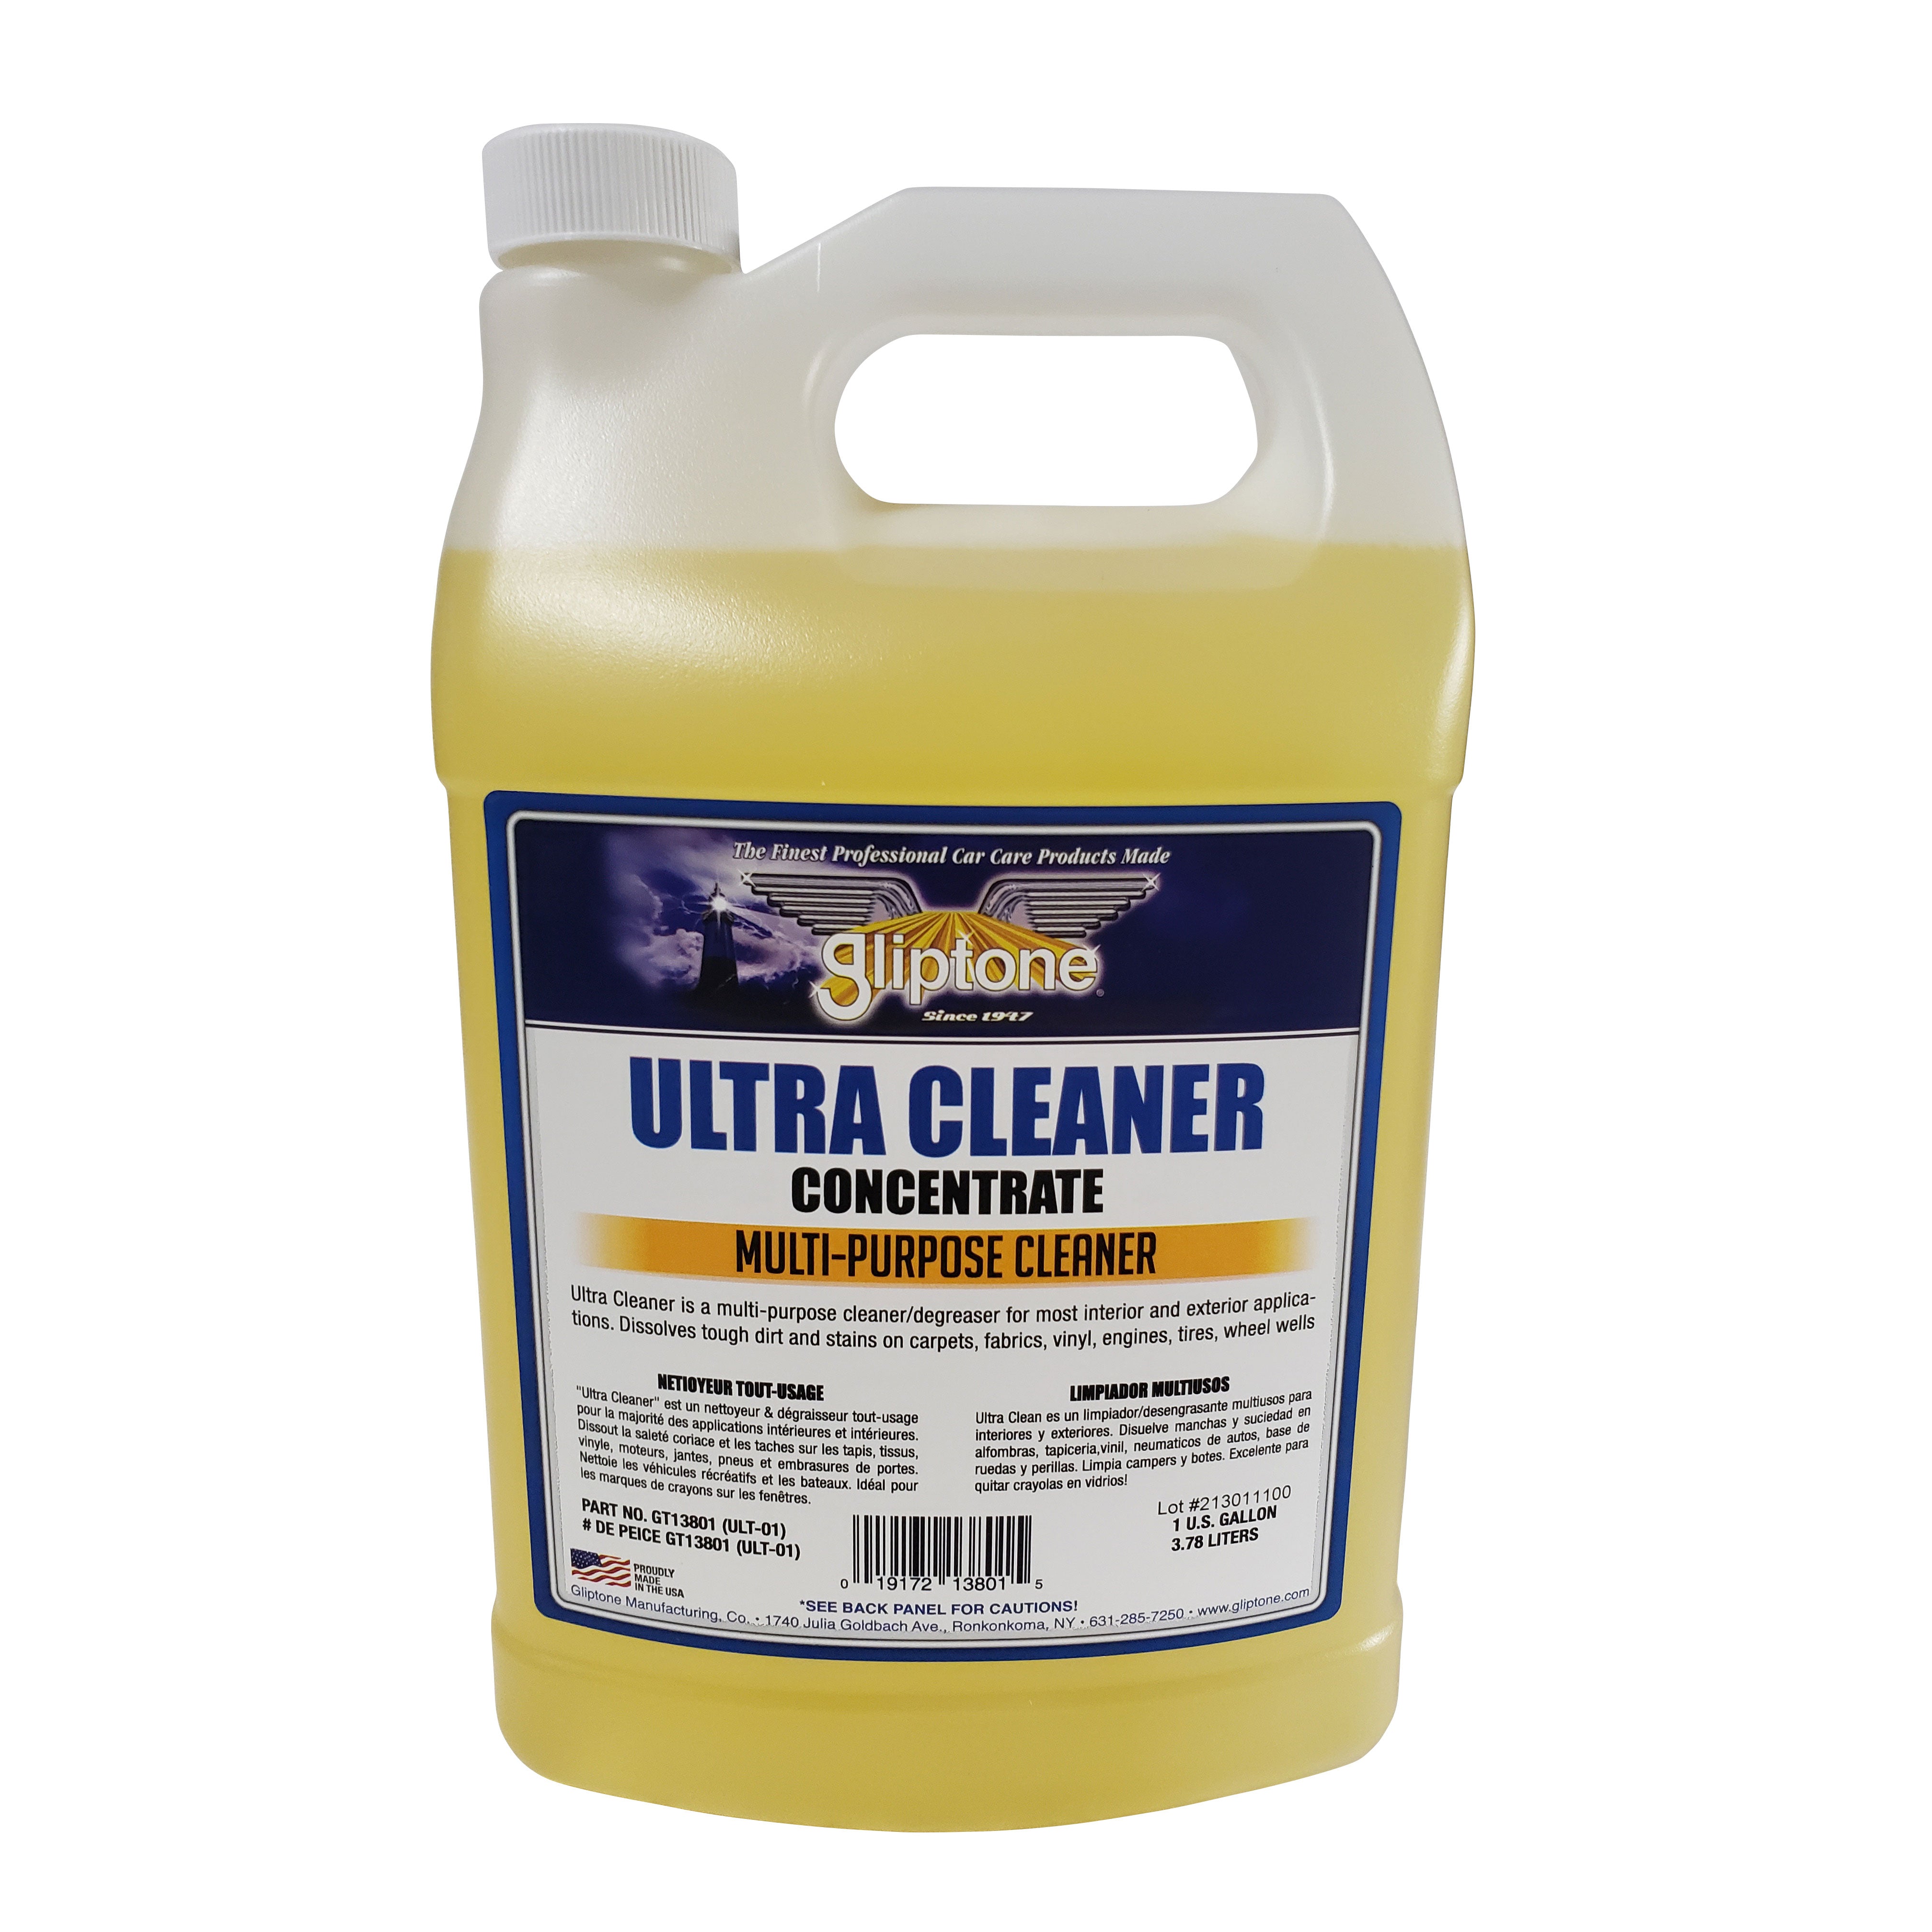 Ultra Cleaner Concentrate